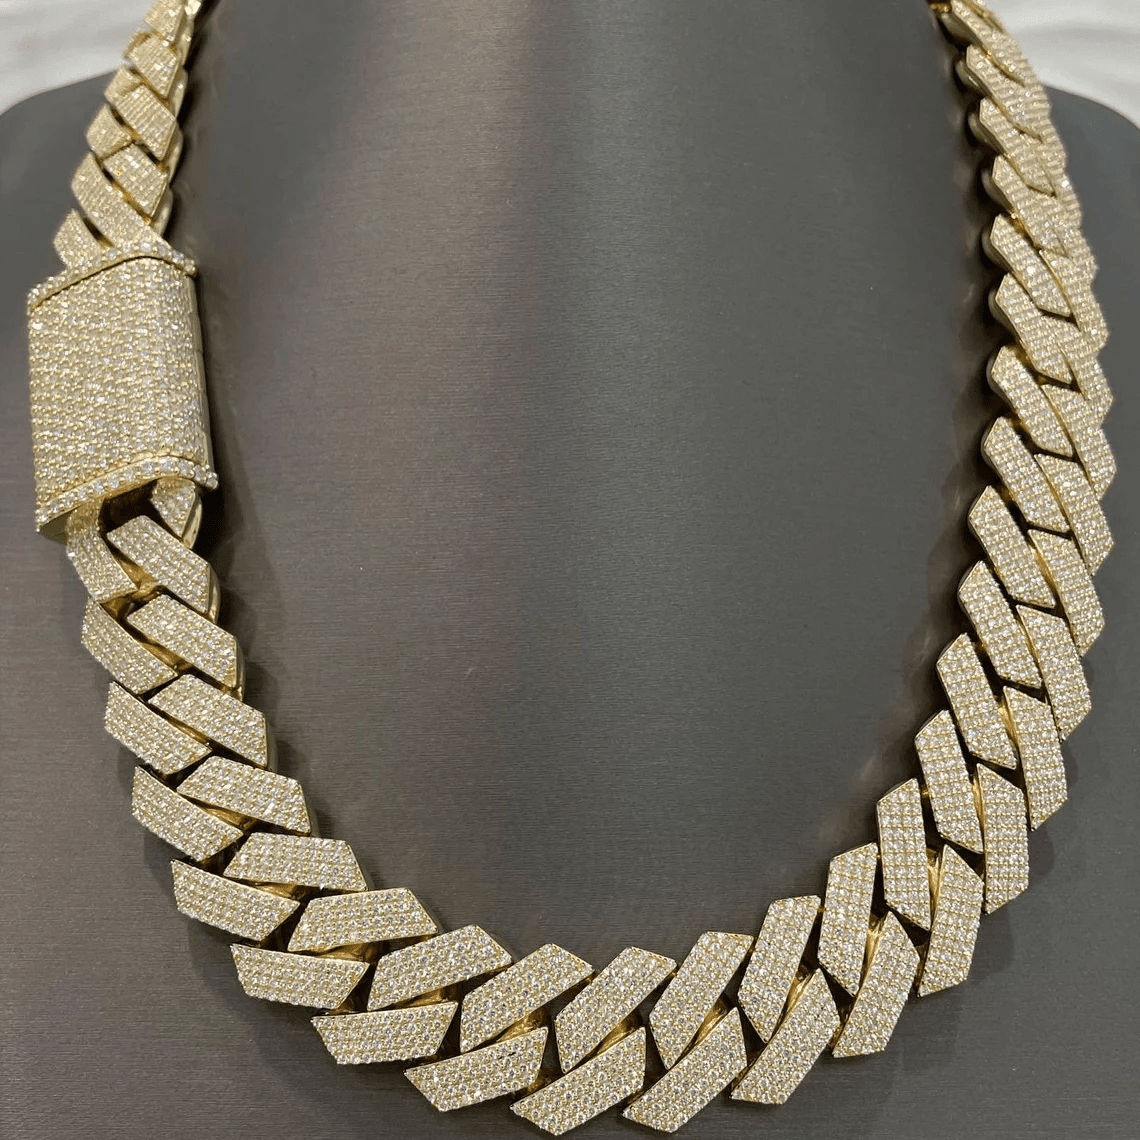 22mm Iced Out Miami Cuban Link Hip Hop Chain with Custom Box Clasp - JBR Jeweler